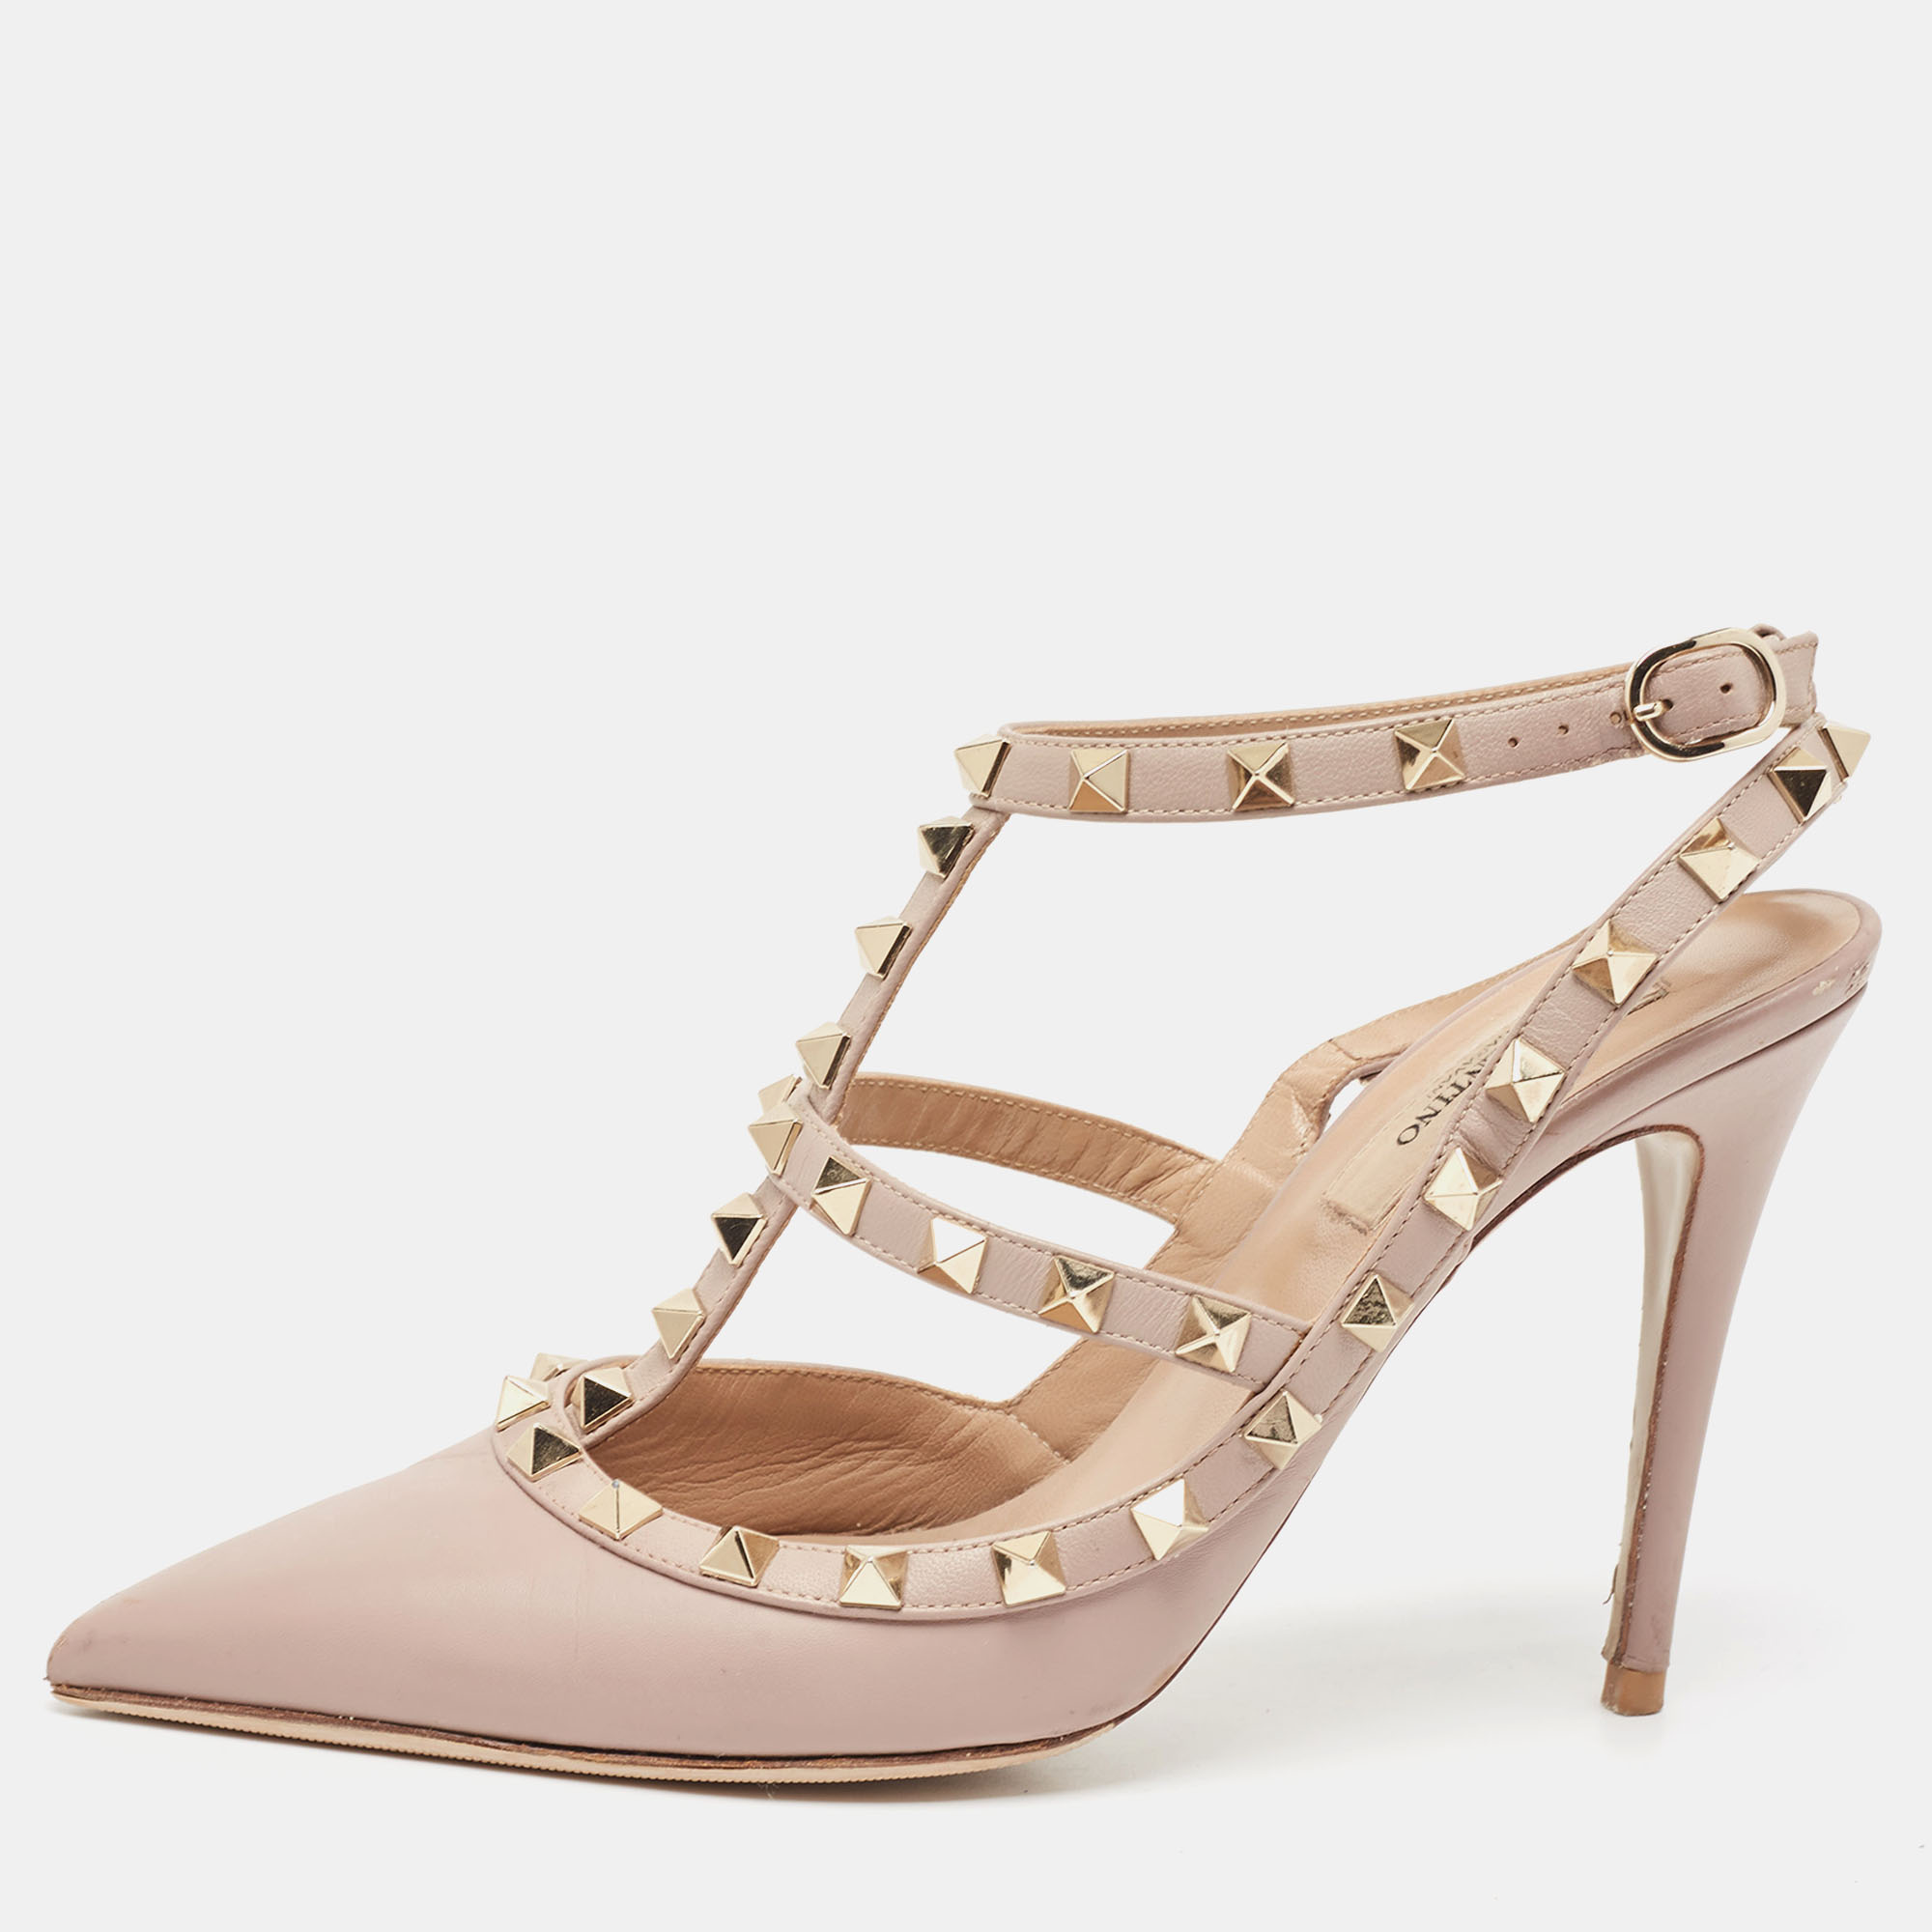 Pre-owned Valentino Garavani Dusty Pink Leather Rockstud Ankle Strap Pumps Size 38